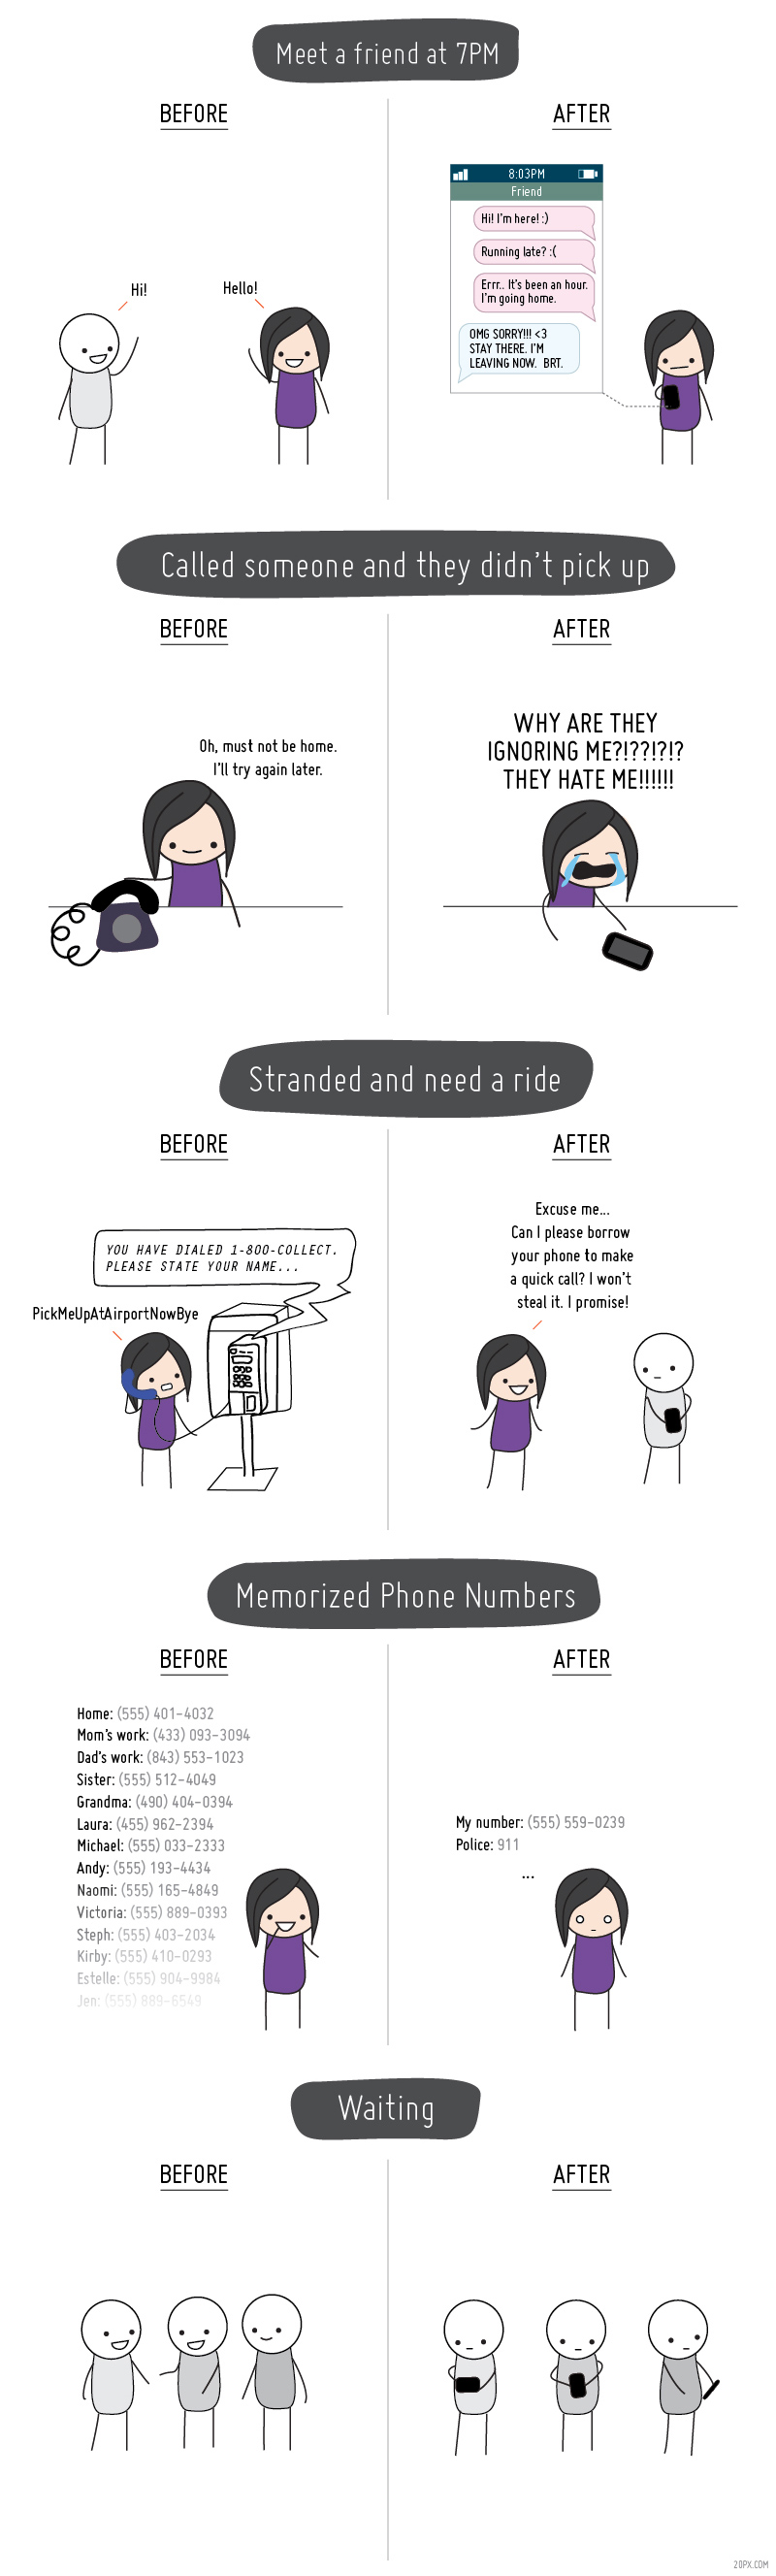 Before and after mobile phones.